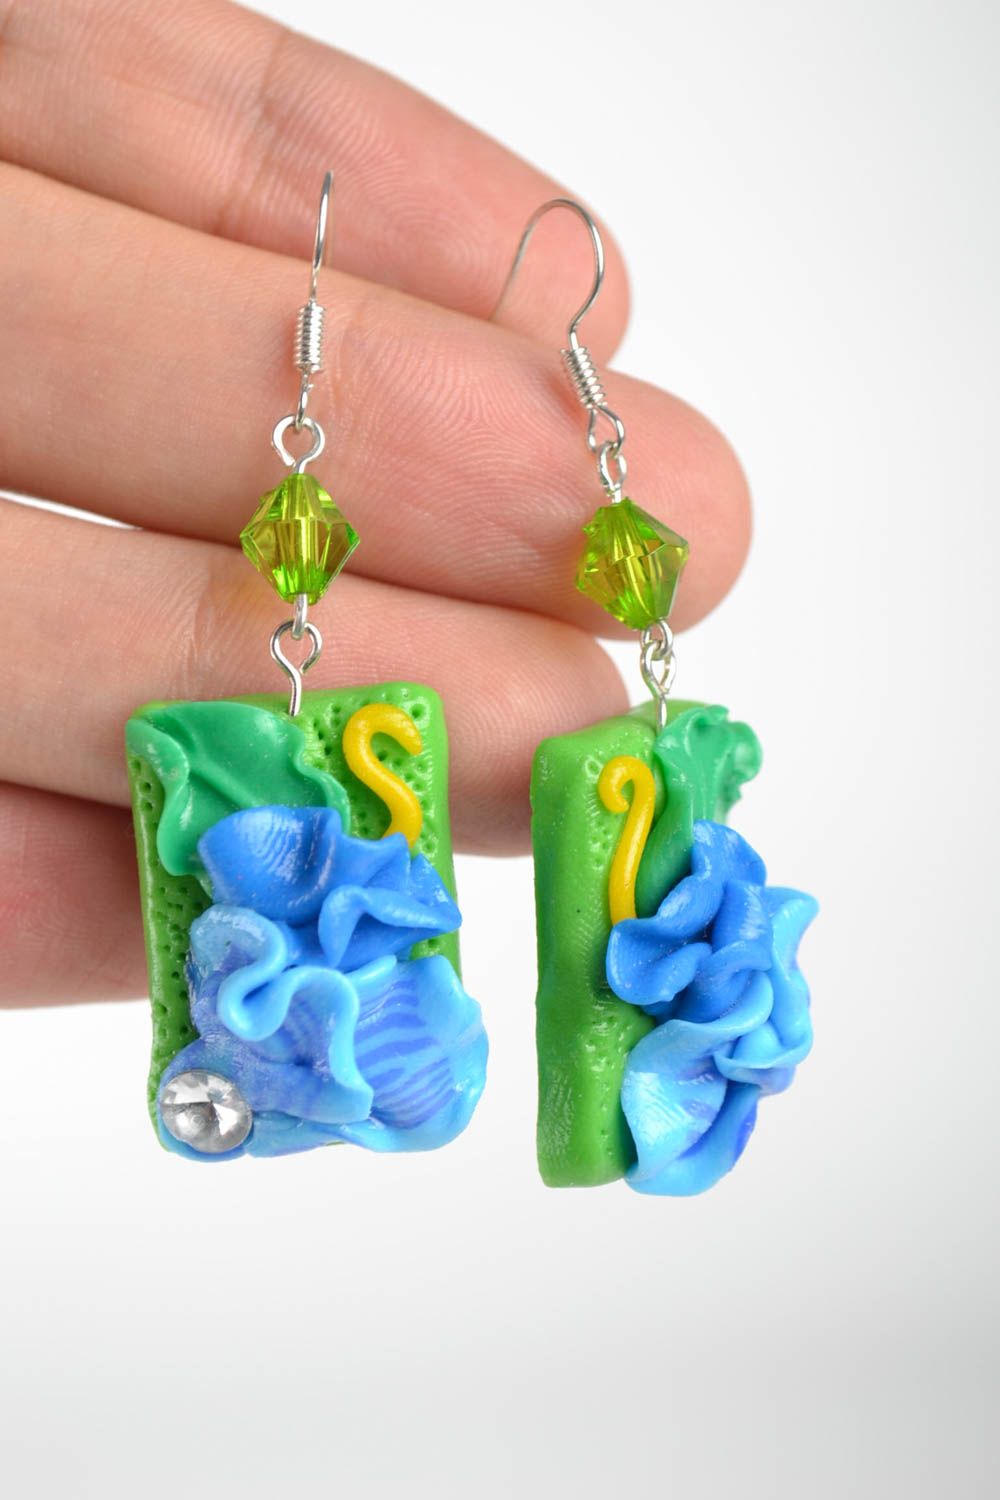 Earrings for women handmade jewelry polymer clay designer earrings gifts for her photo 5